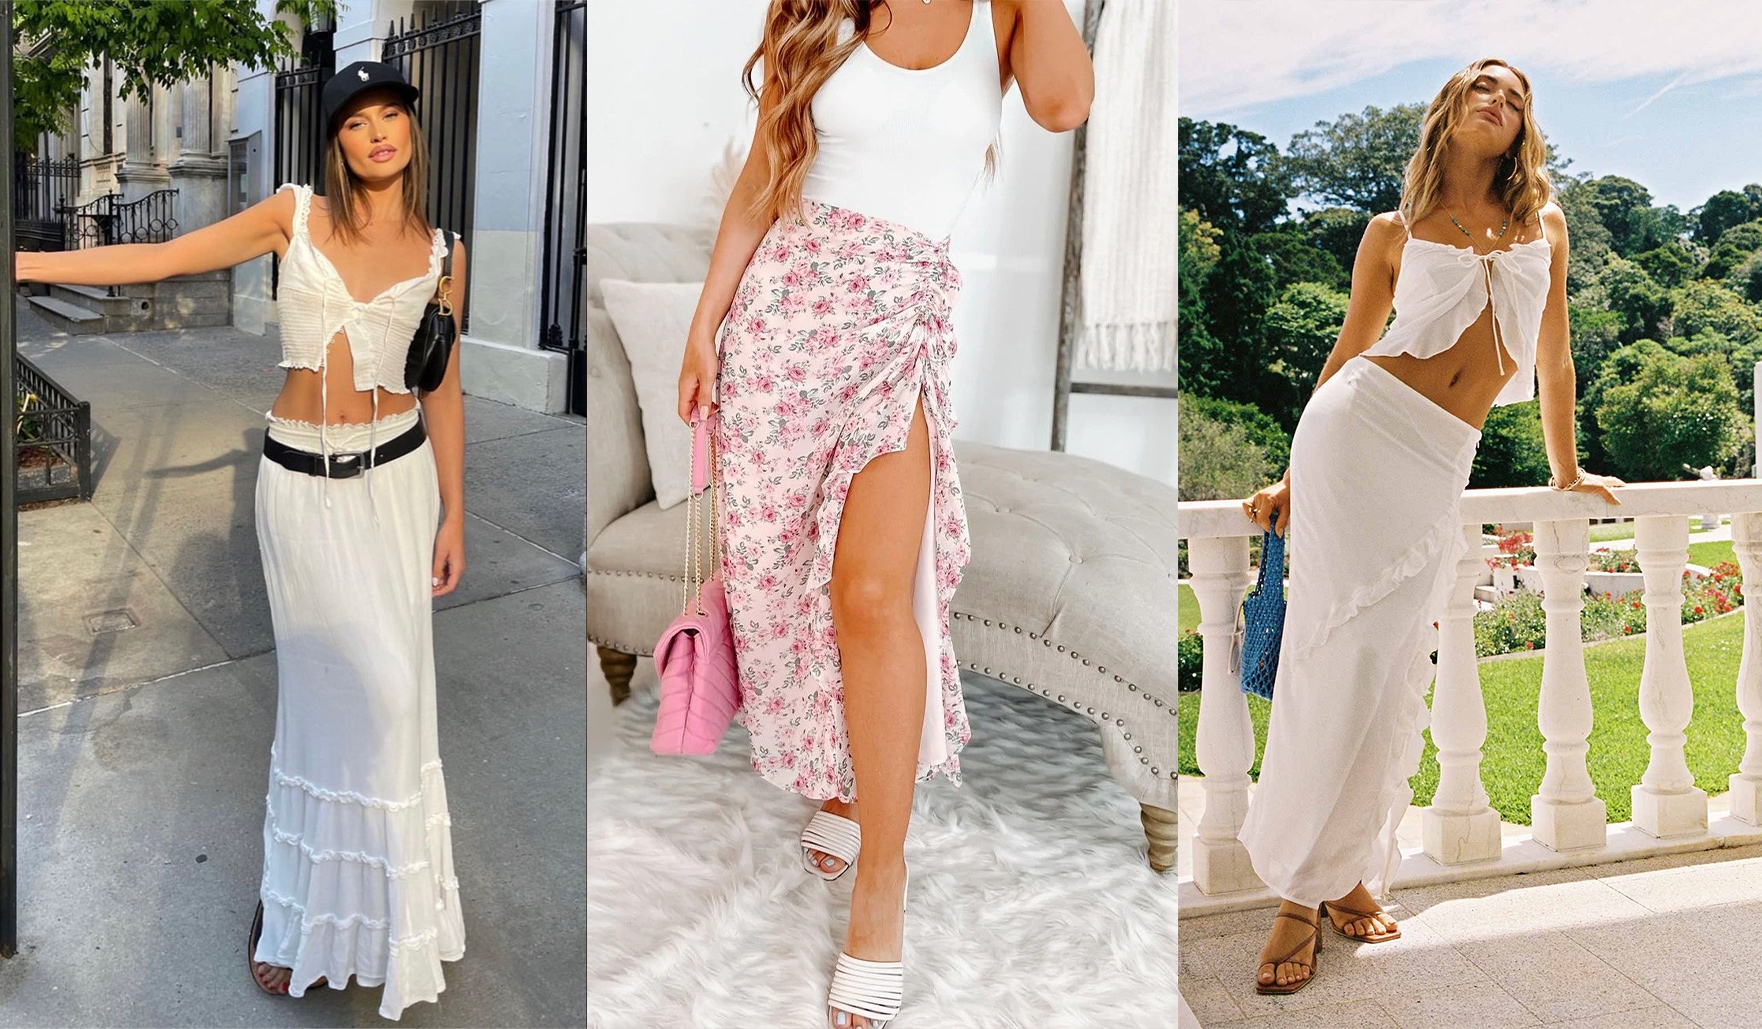 2. Effortless Vibes with Maxi Skirt